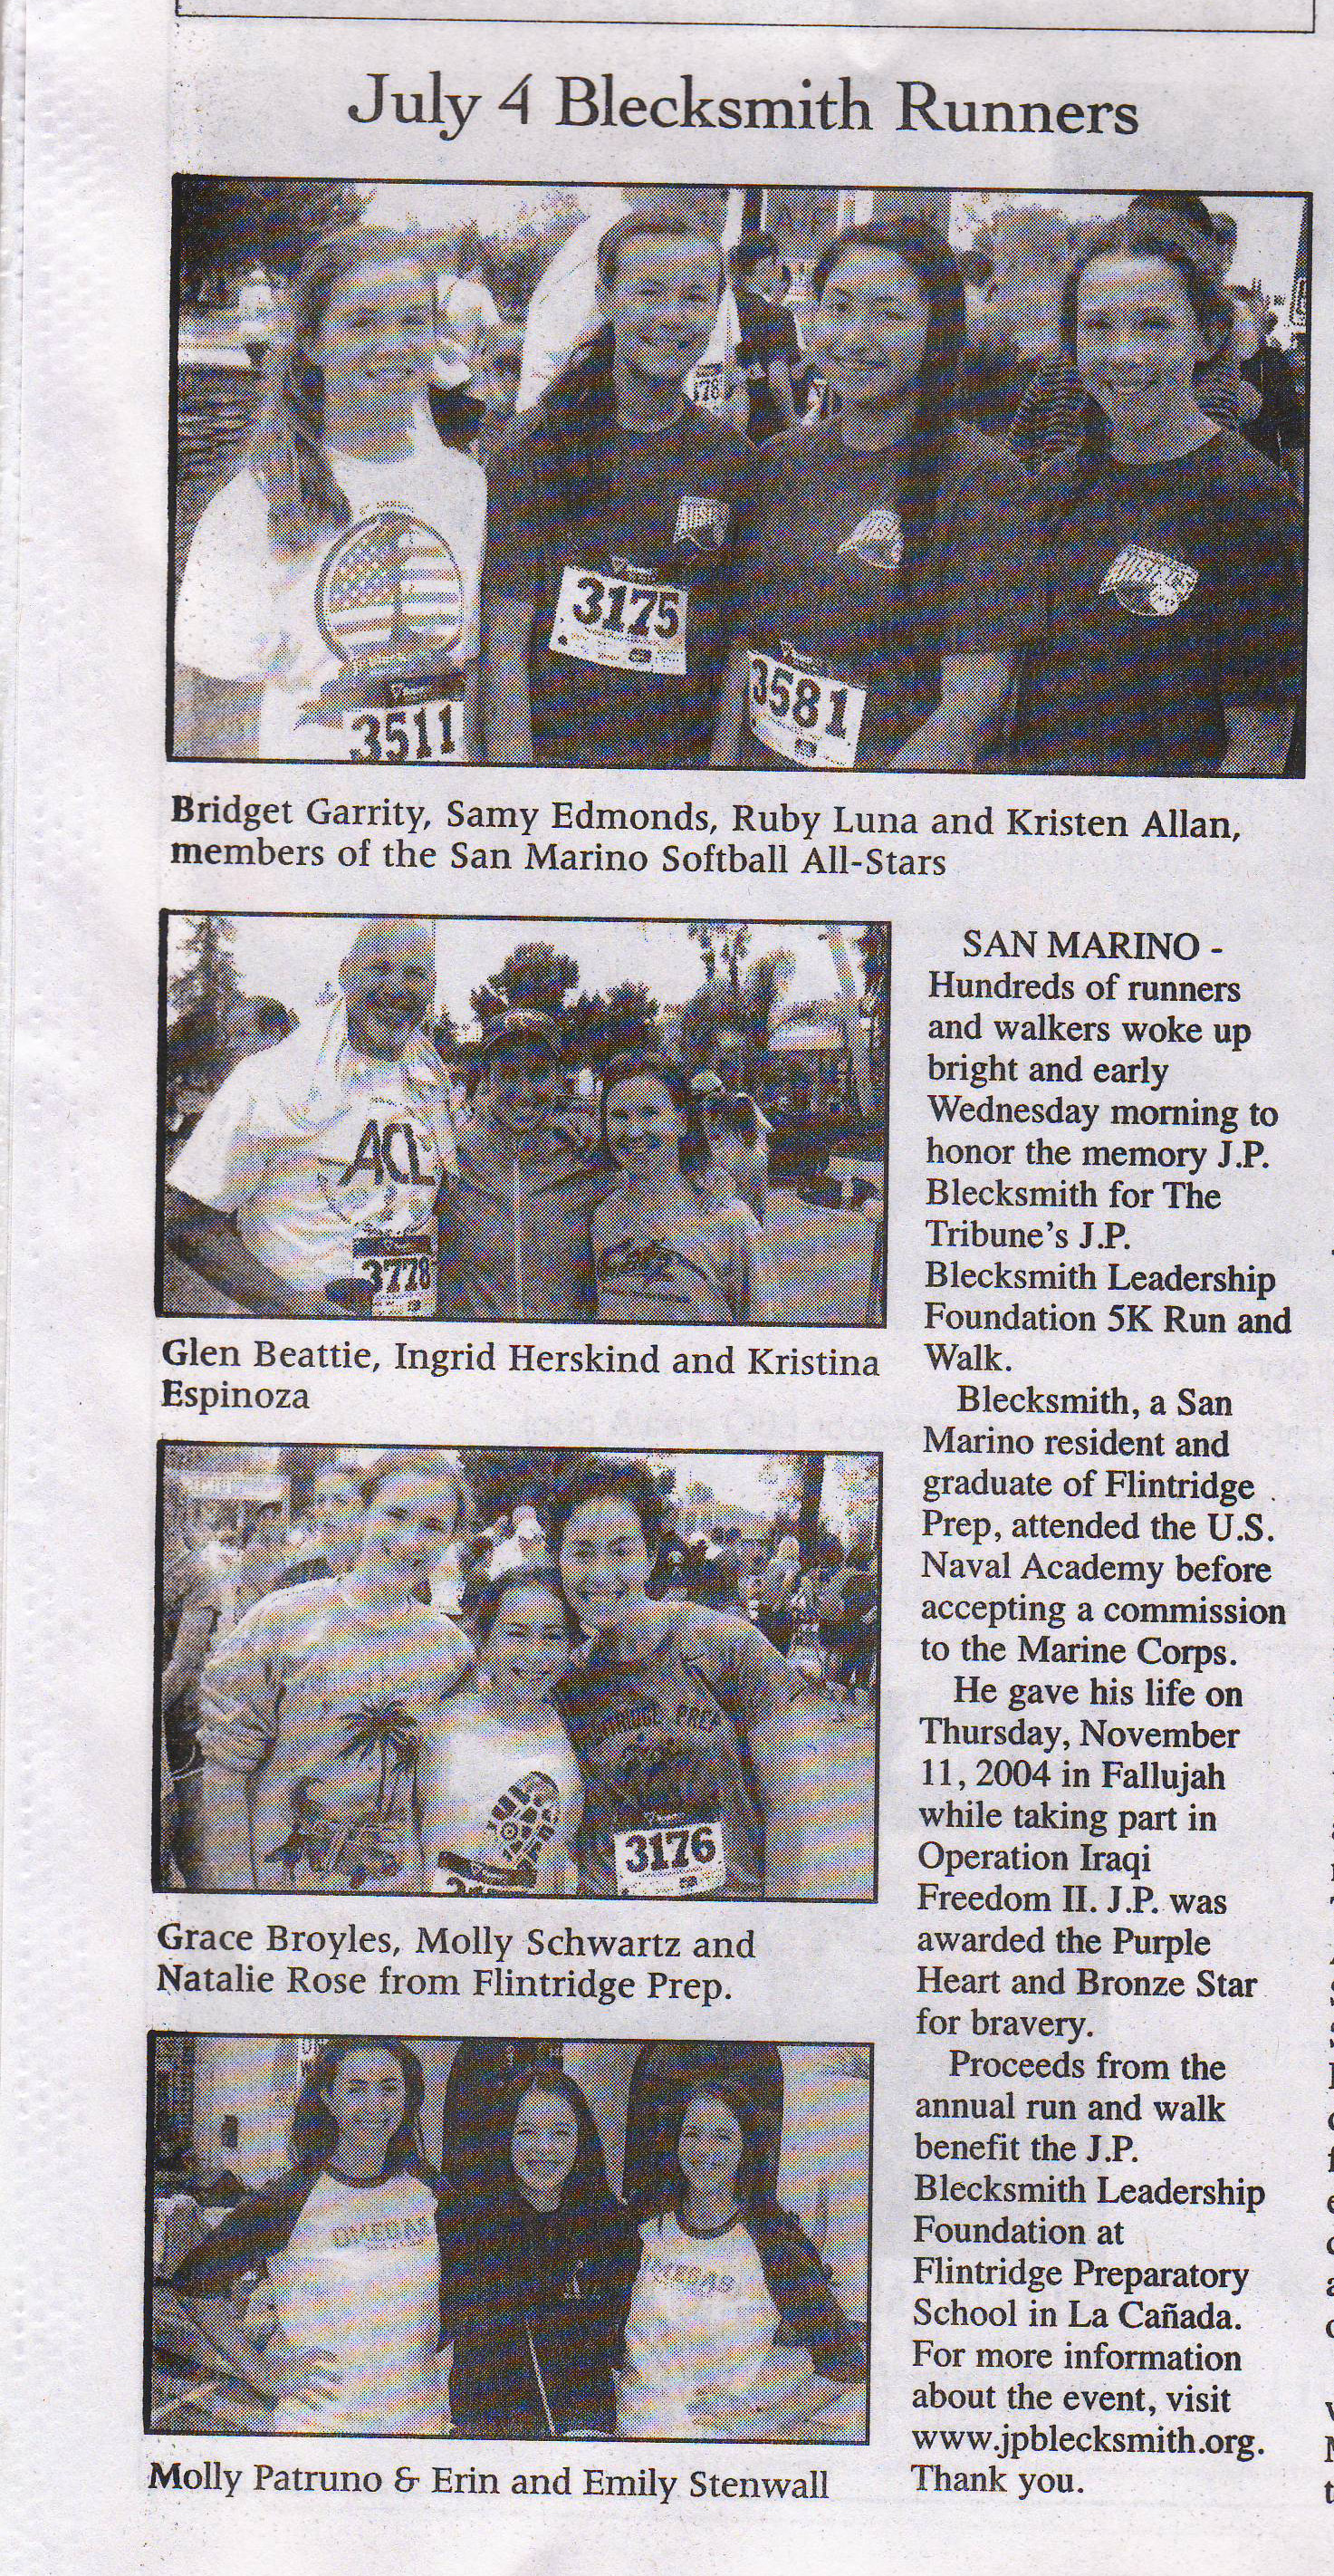 2012 Blecksmith - Tribune pictures of runners